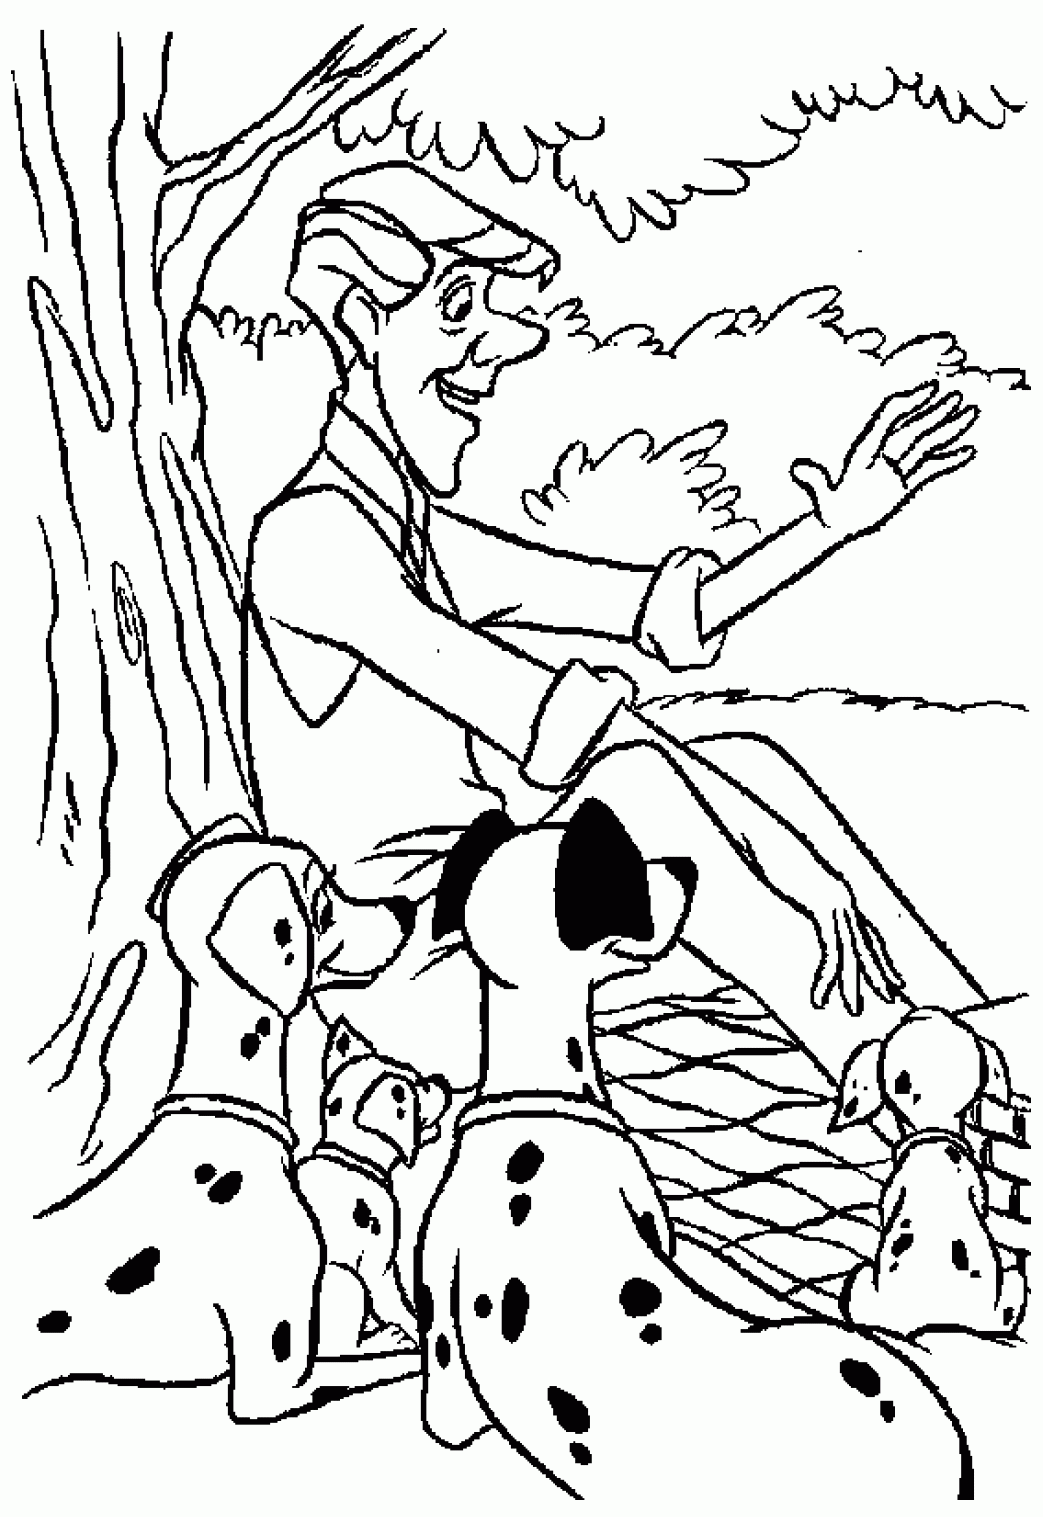 Download 101 dalmatians to download for free - 101 Dalmatians Kids Coloring Pages